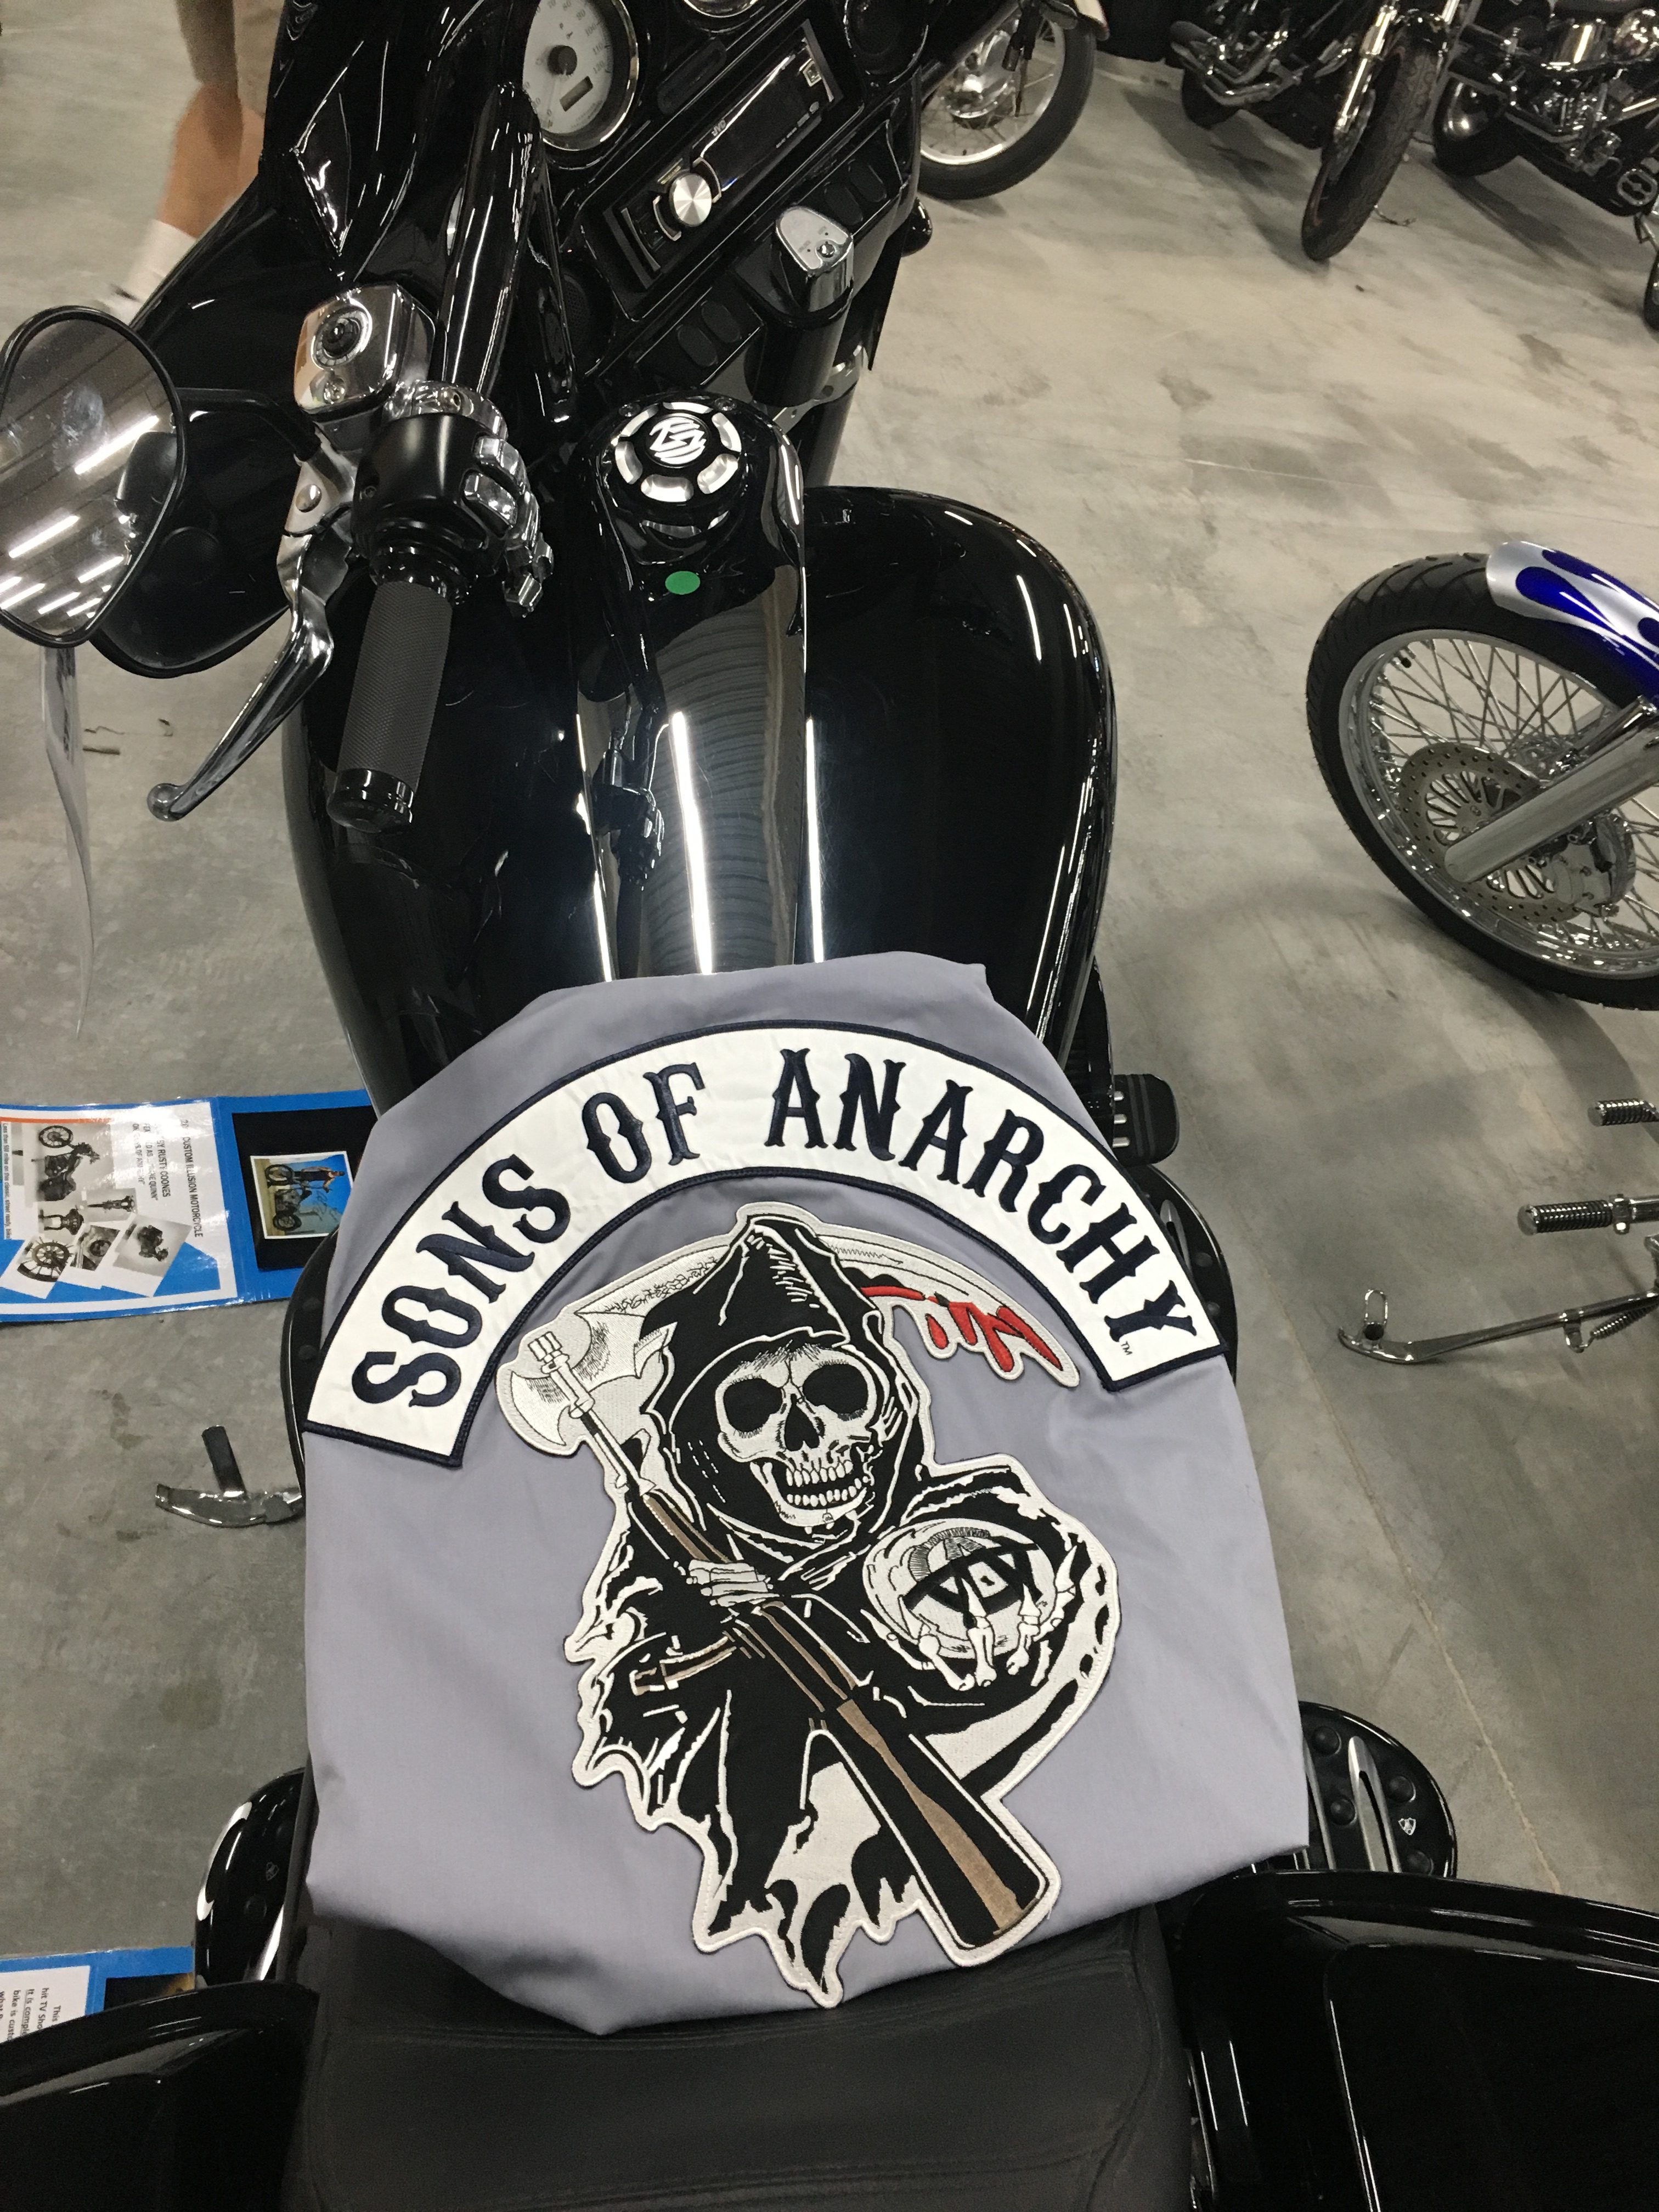 2013 Illusion Custom Bagger, Sons of Anarchy